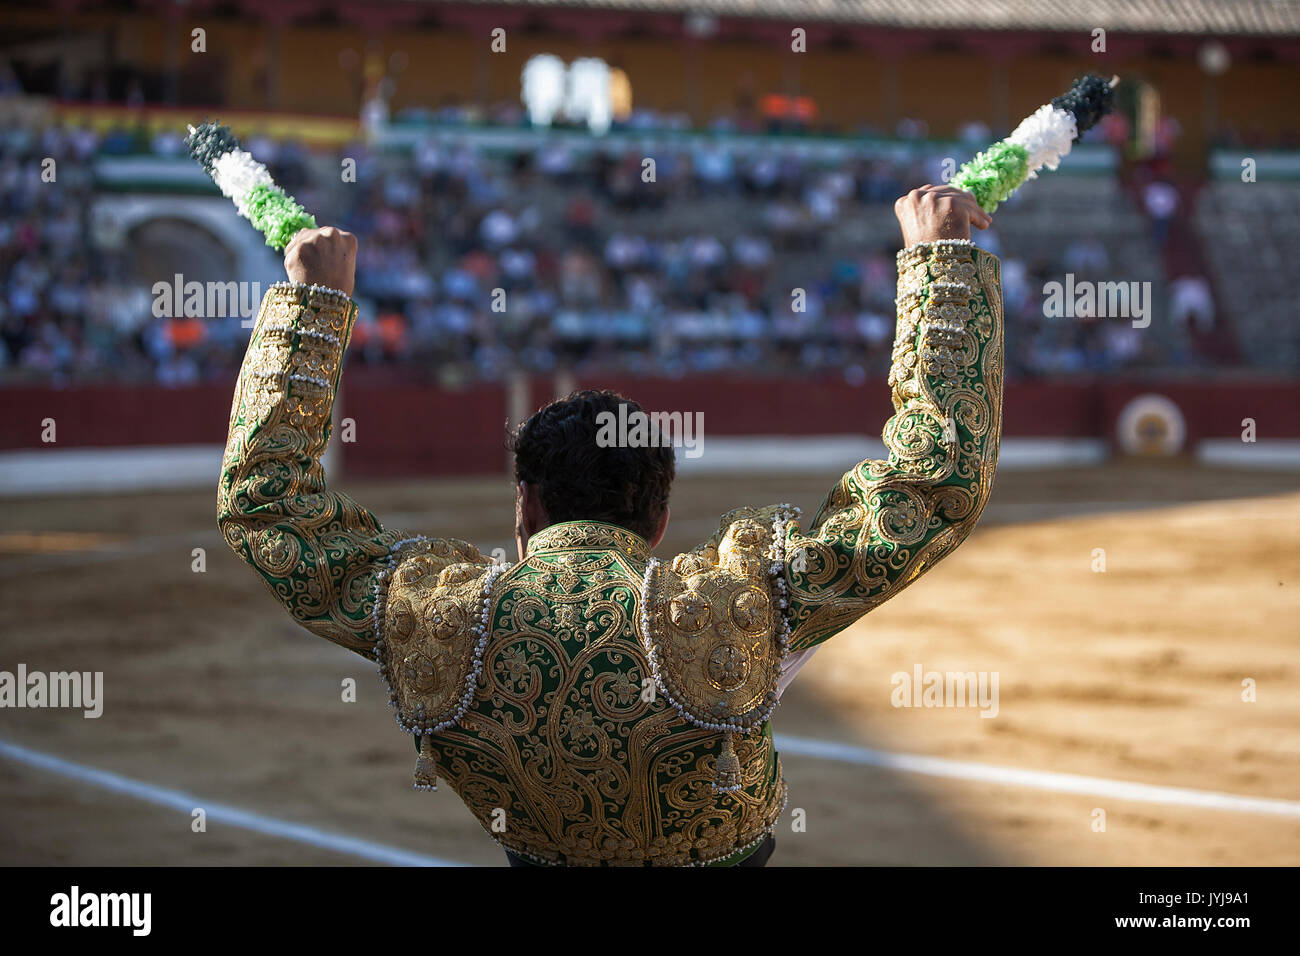 Banderillero, The Torero Who, On Foot, Places The Darts In The Bull, The  Banderillas Is Brightly-coloured Darts Placed In The Bull Stock Photo,  Picture and Royalty Free Image. Image 24047902.